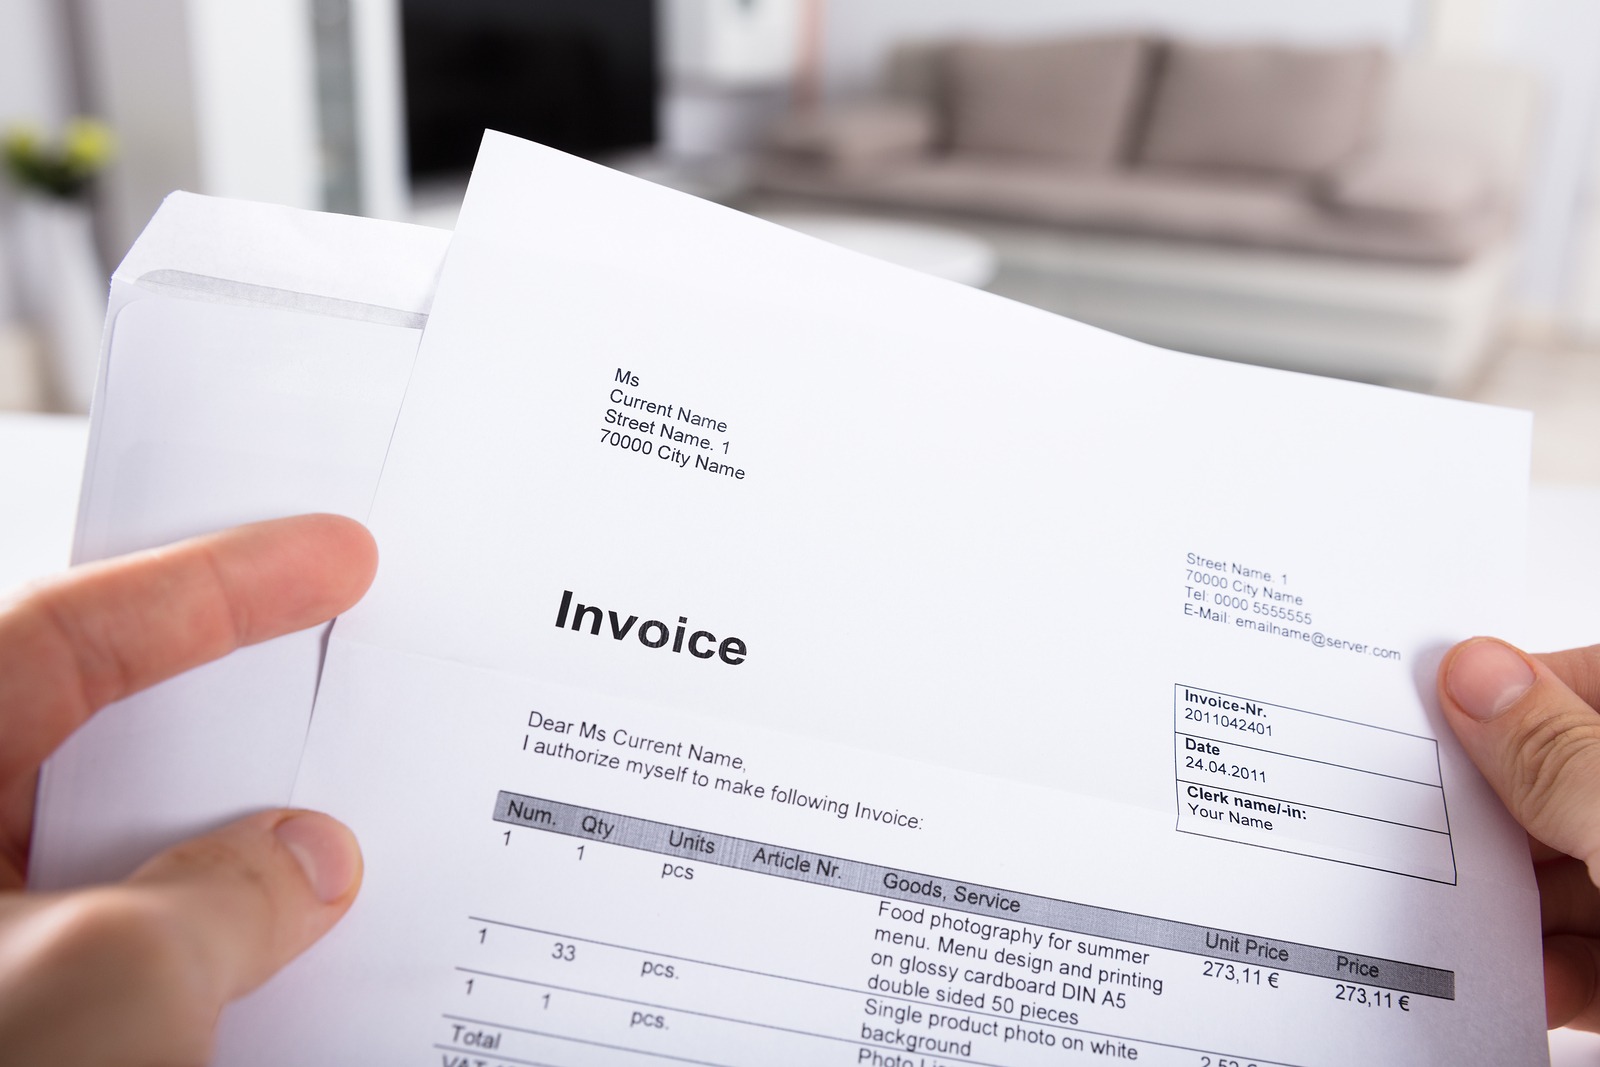 invoice factoring services